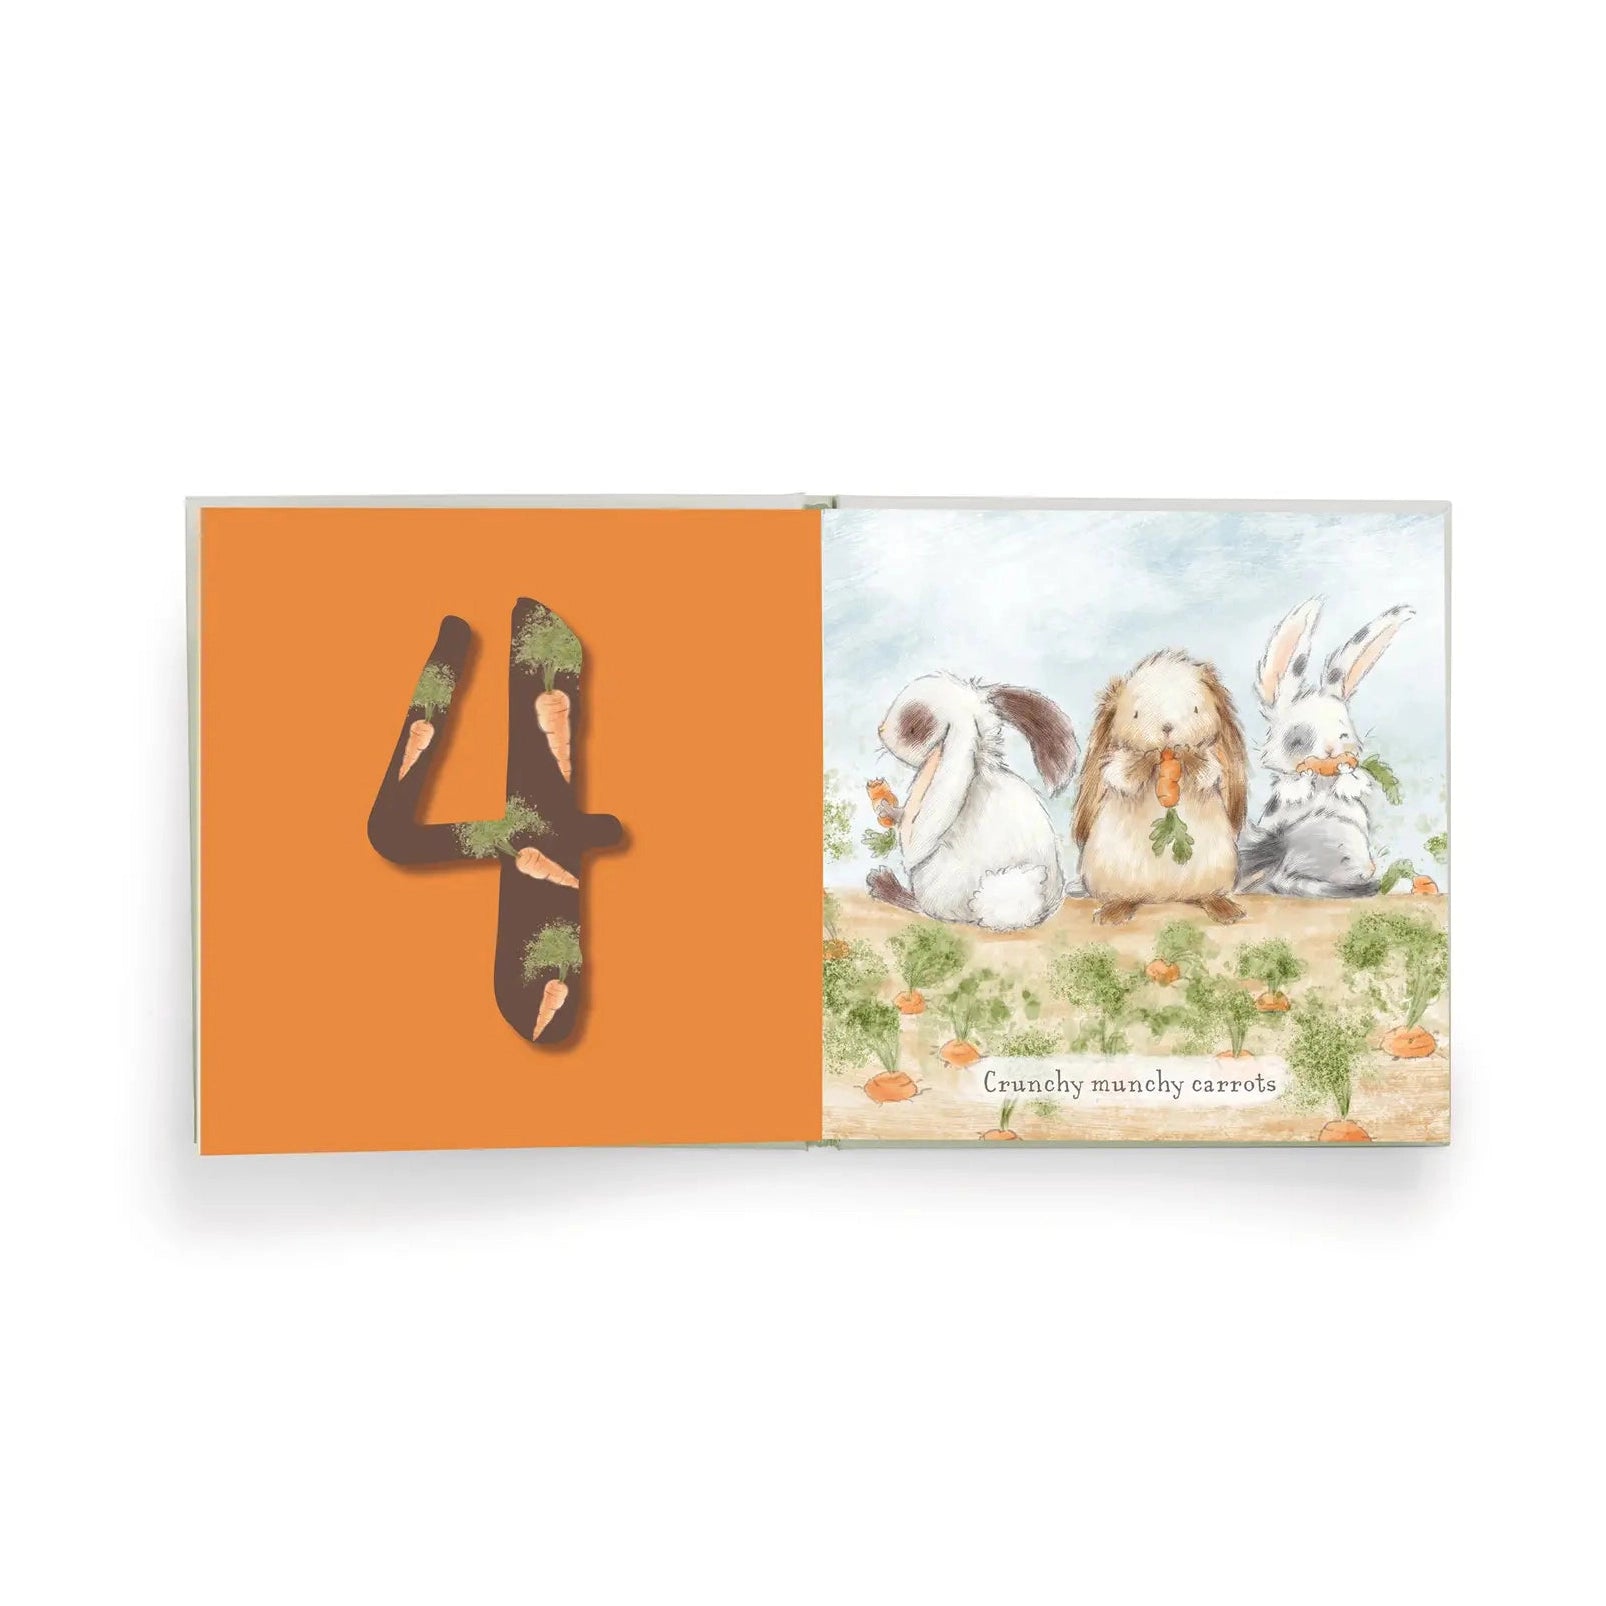 Hares Play-A Counting Board Book